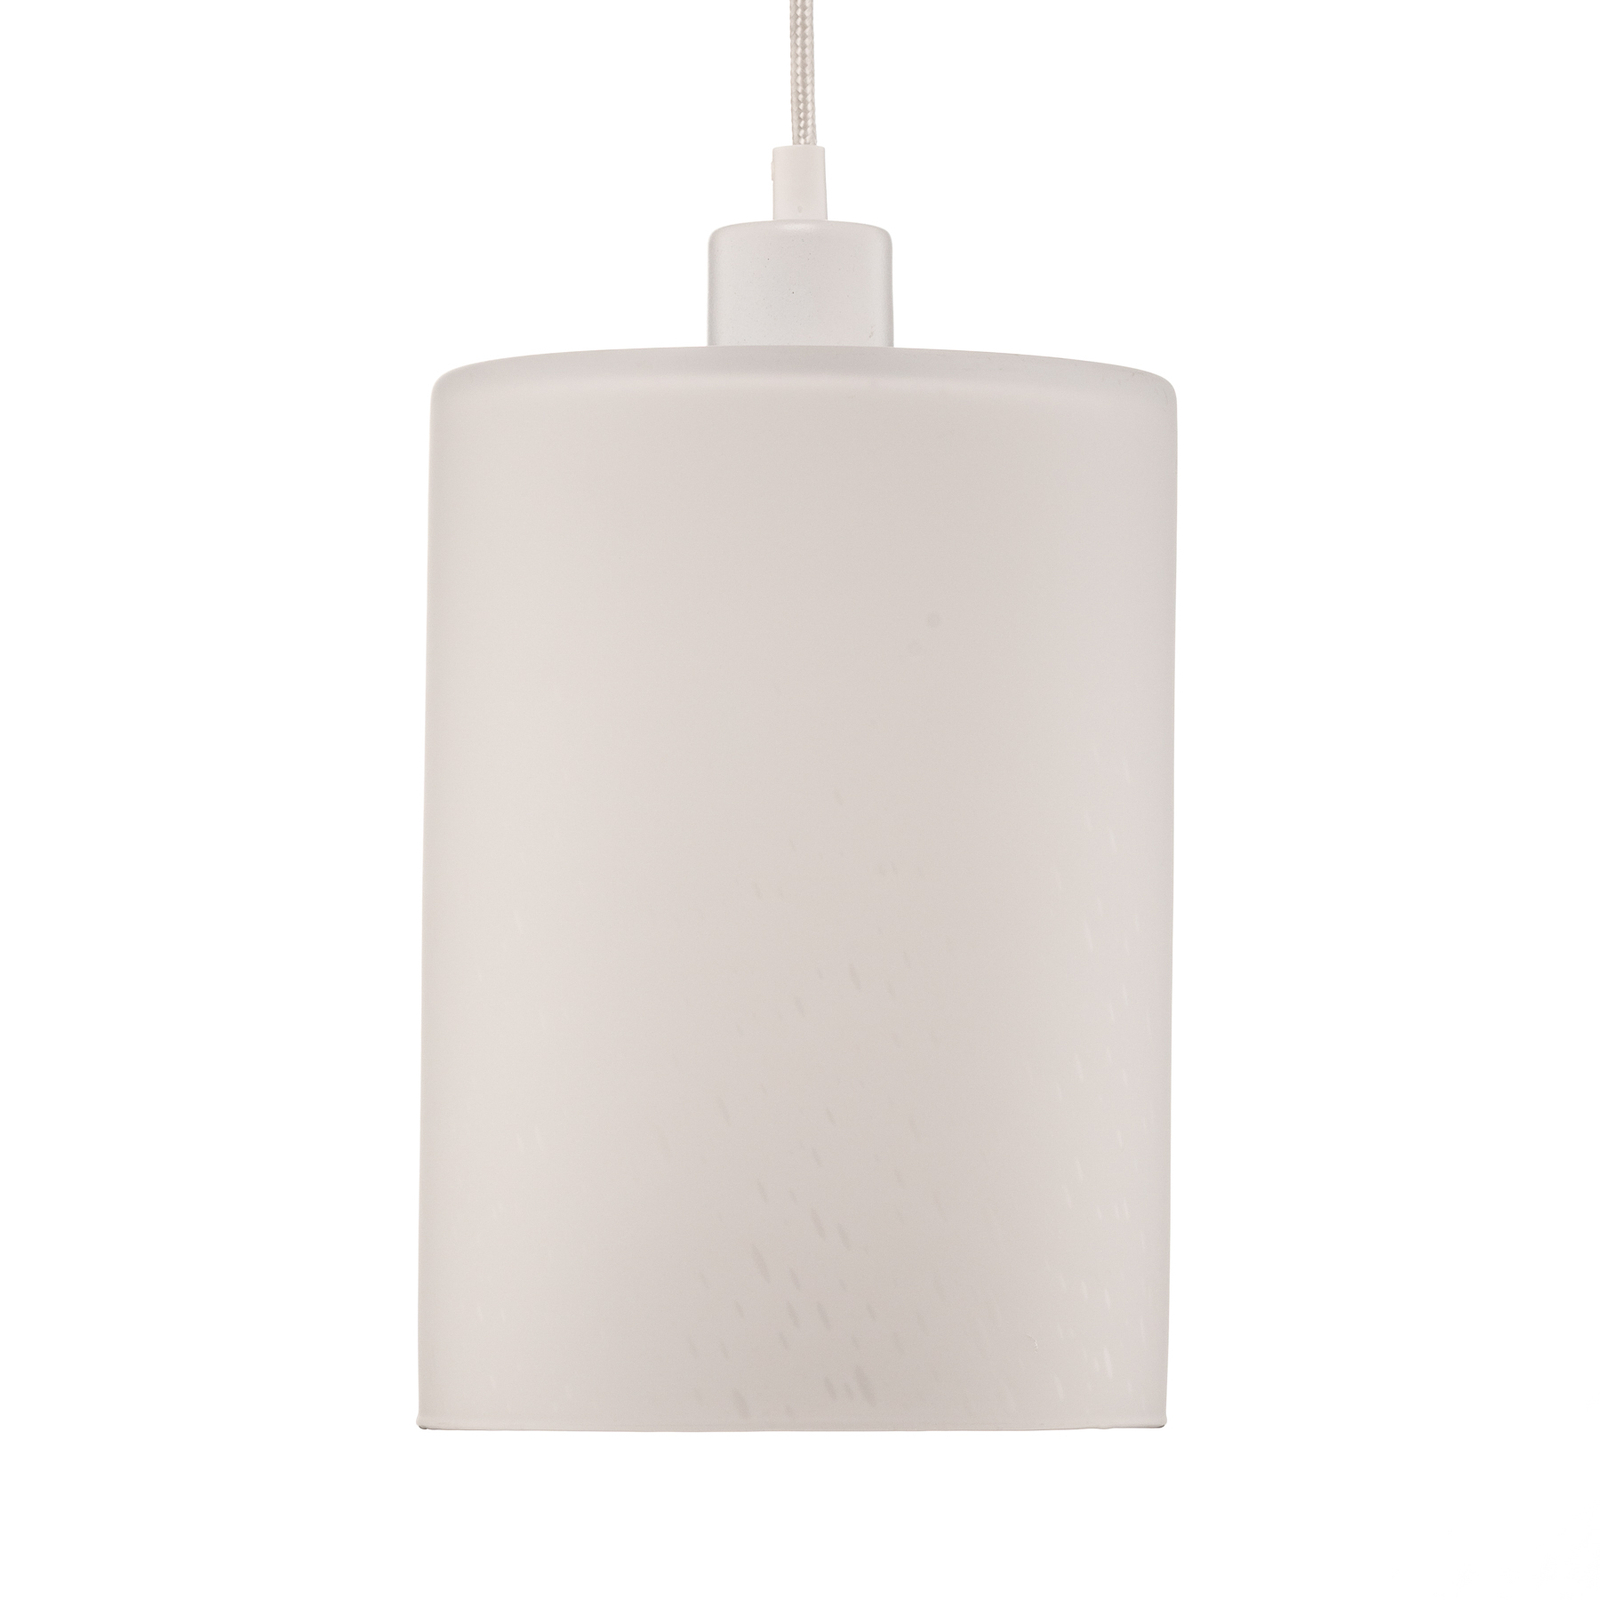 Soda hanging light with white glass shade Ø 18cm